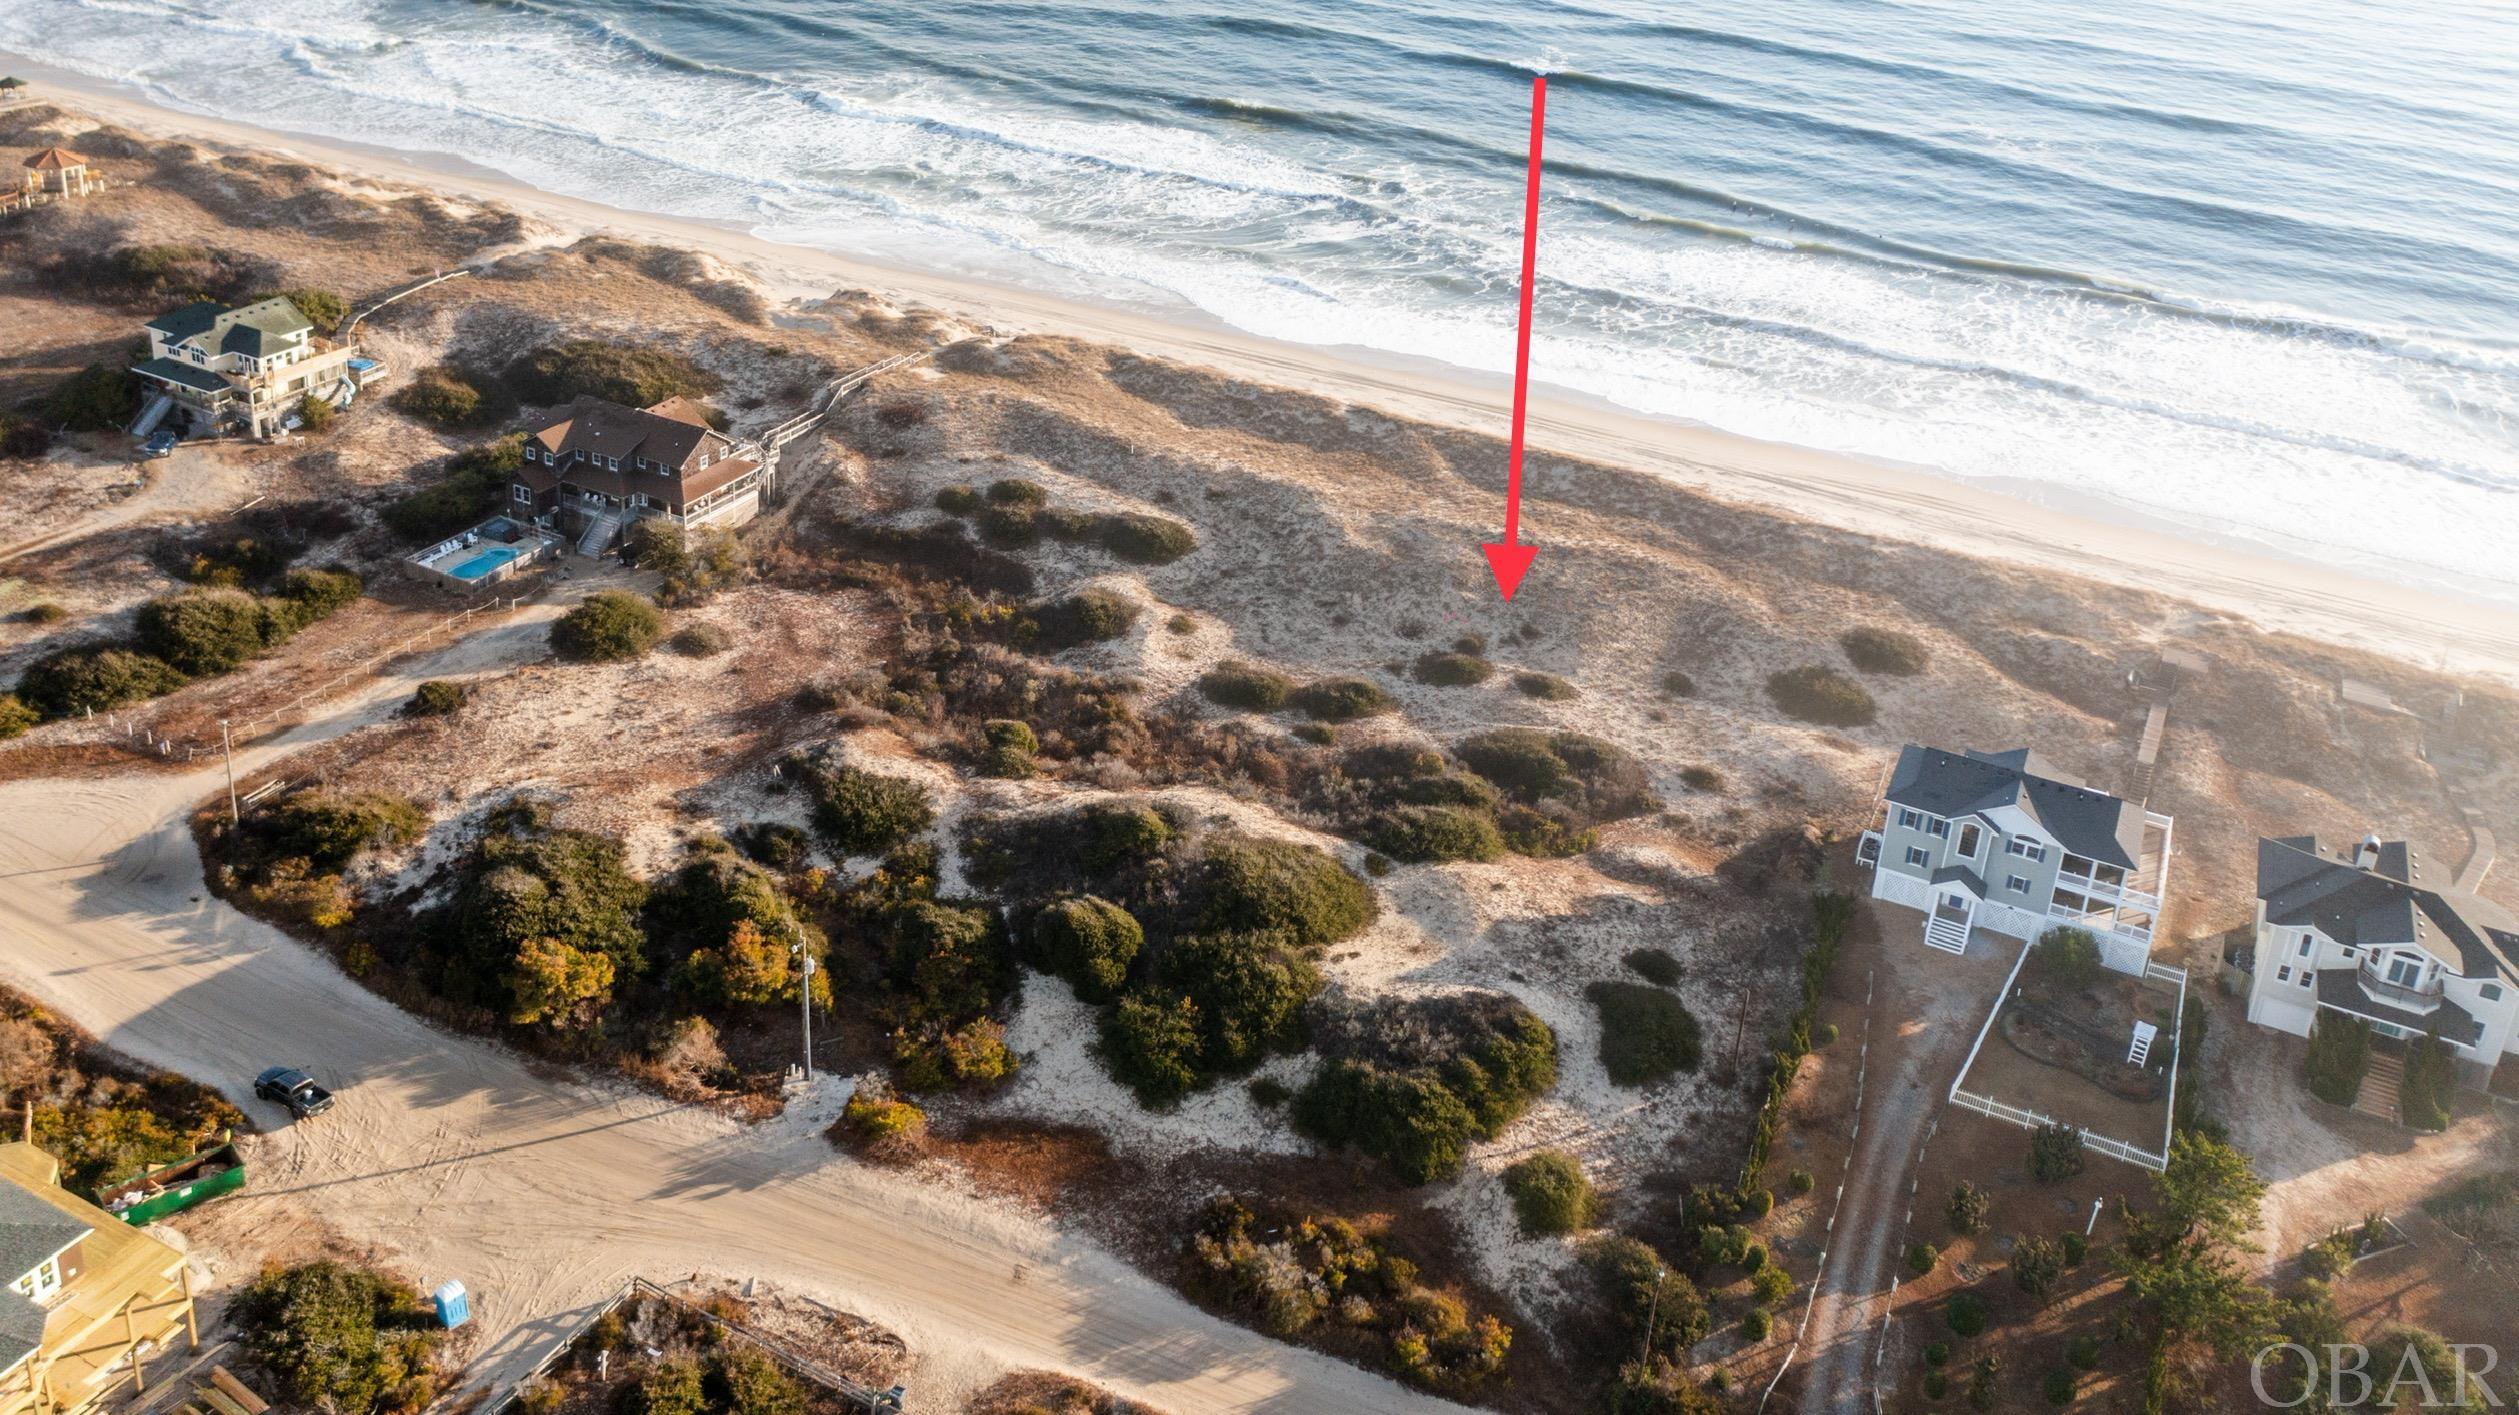 Great oceanfront lot with plenty of room to build in the preferred "X" flood zone! Views galore !! Wild horses for company. Survey in associated docs. GIS Flood Zone info (approx) in assoc docs.